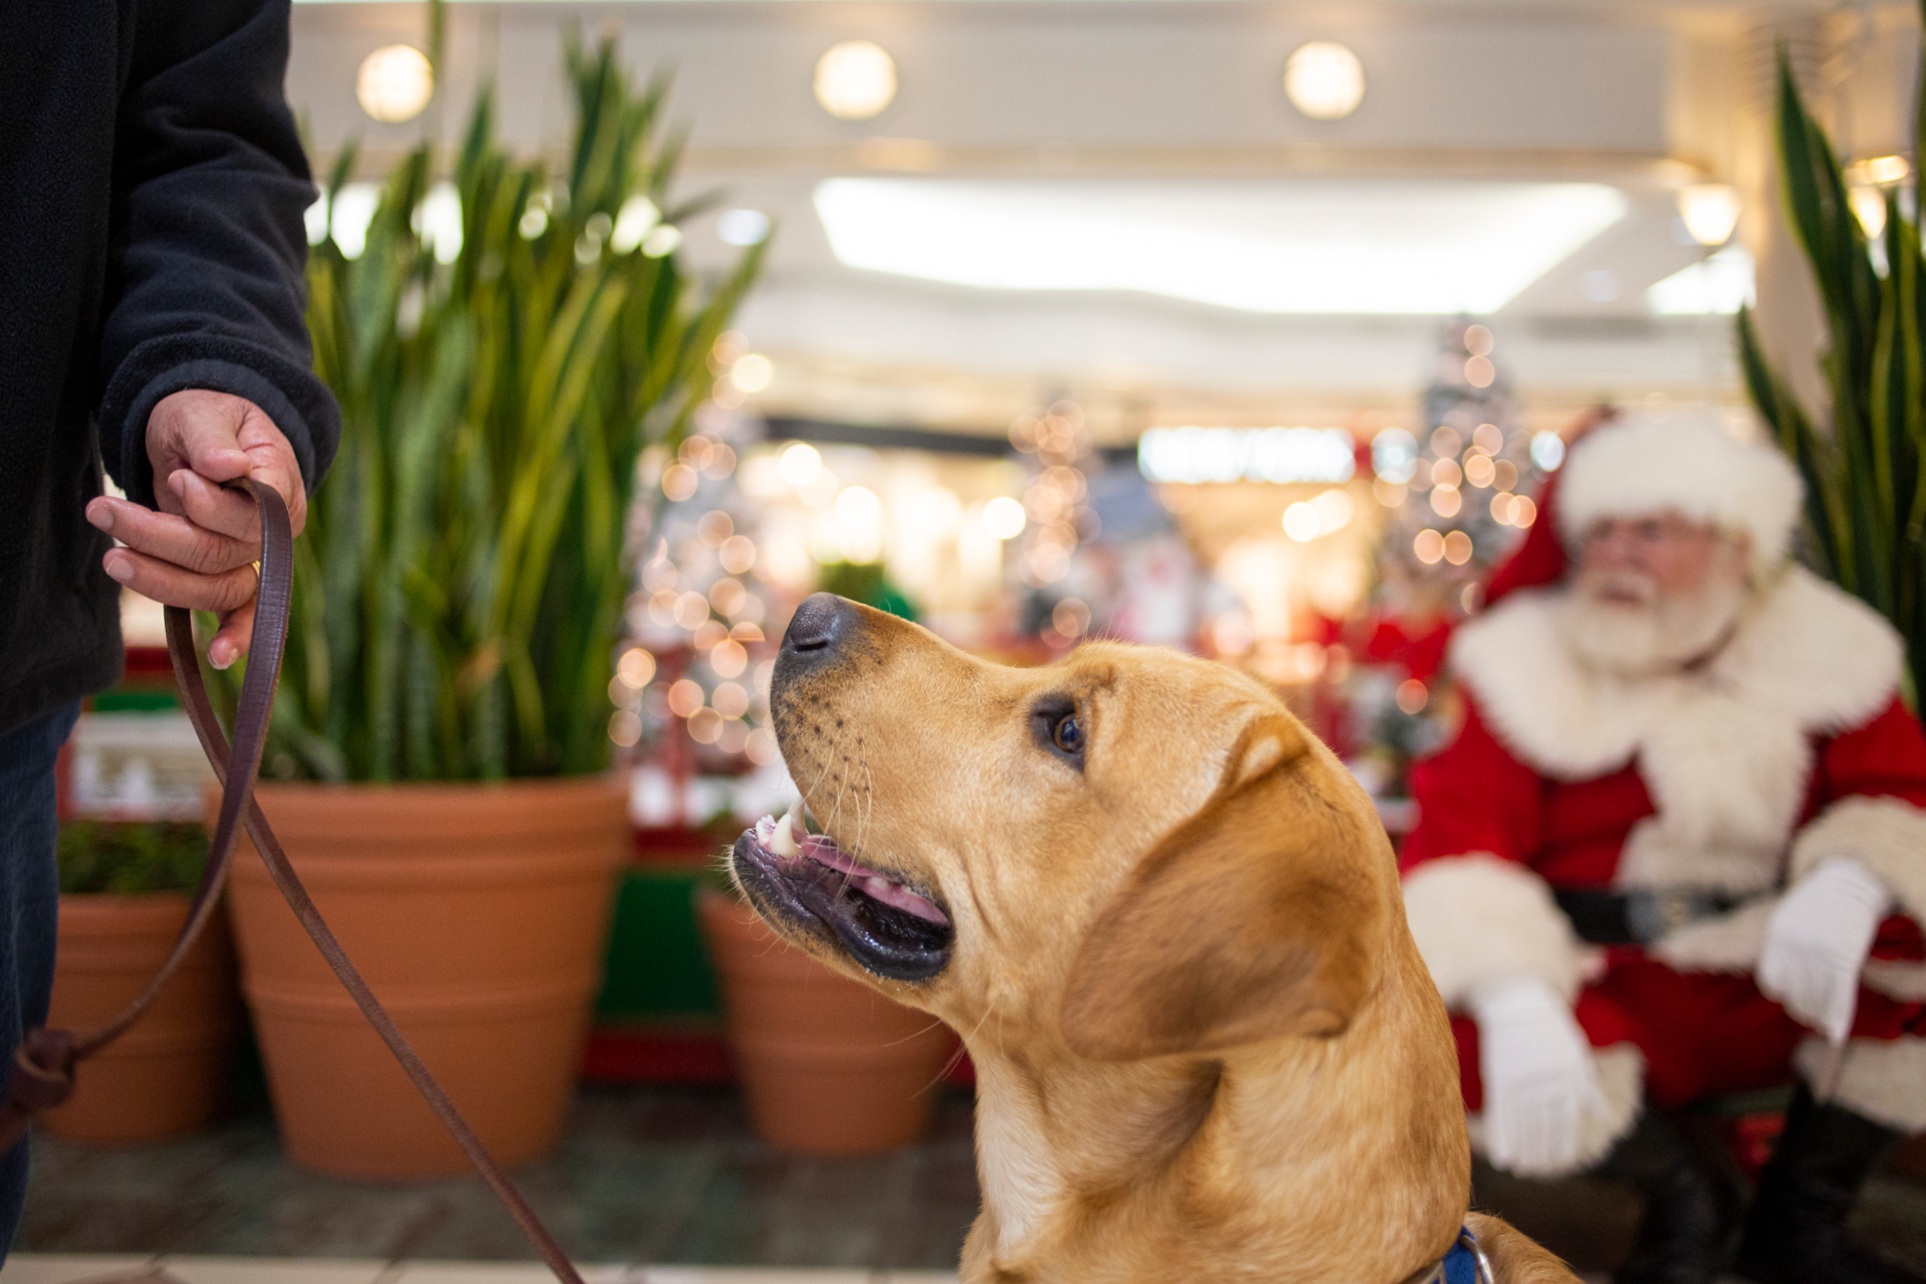  Brody checks in with Cindy while visiting Santa during a Guiding Eyes outing to Eastview Mall in Victor, NY Nov 26, 2018. The eye contact maintained between Cindy and Brody called "checking in" is an exercise of keeping focused in situations full of